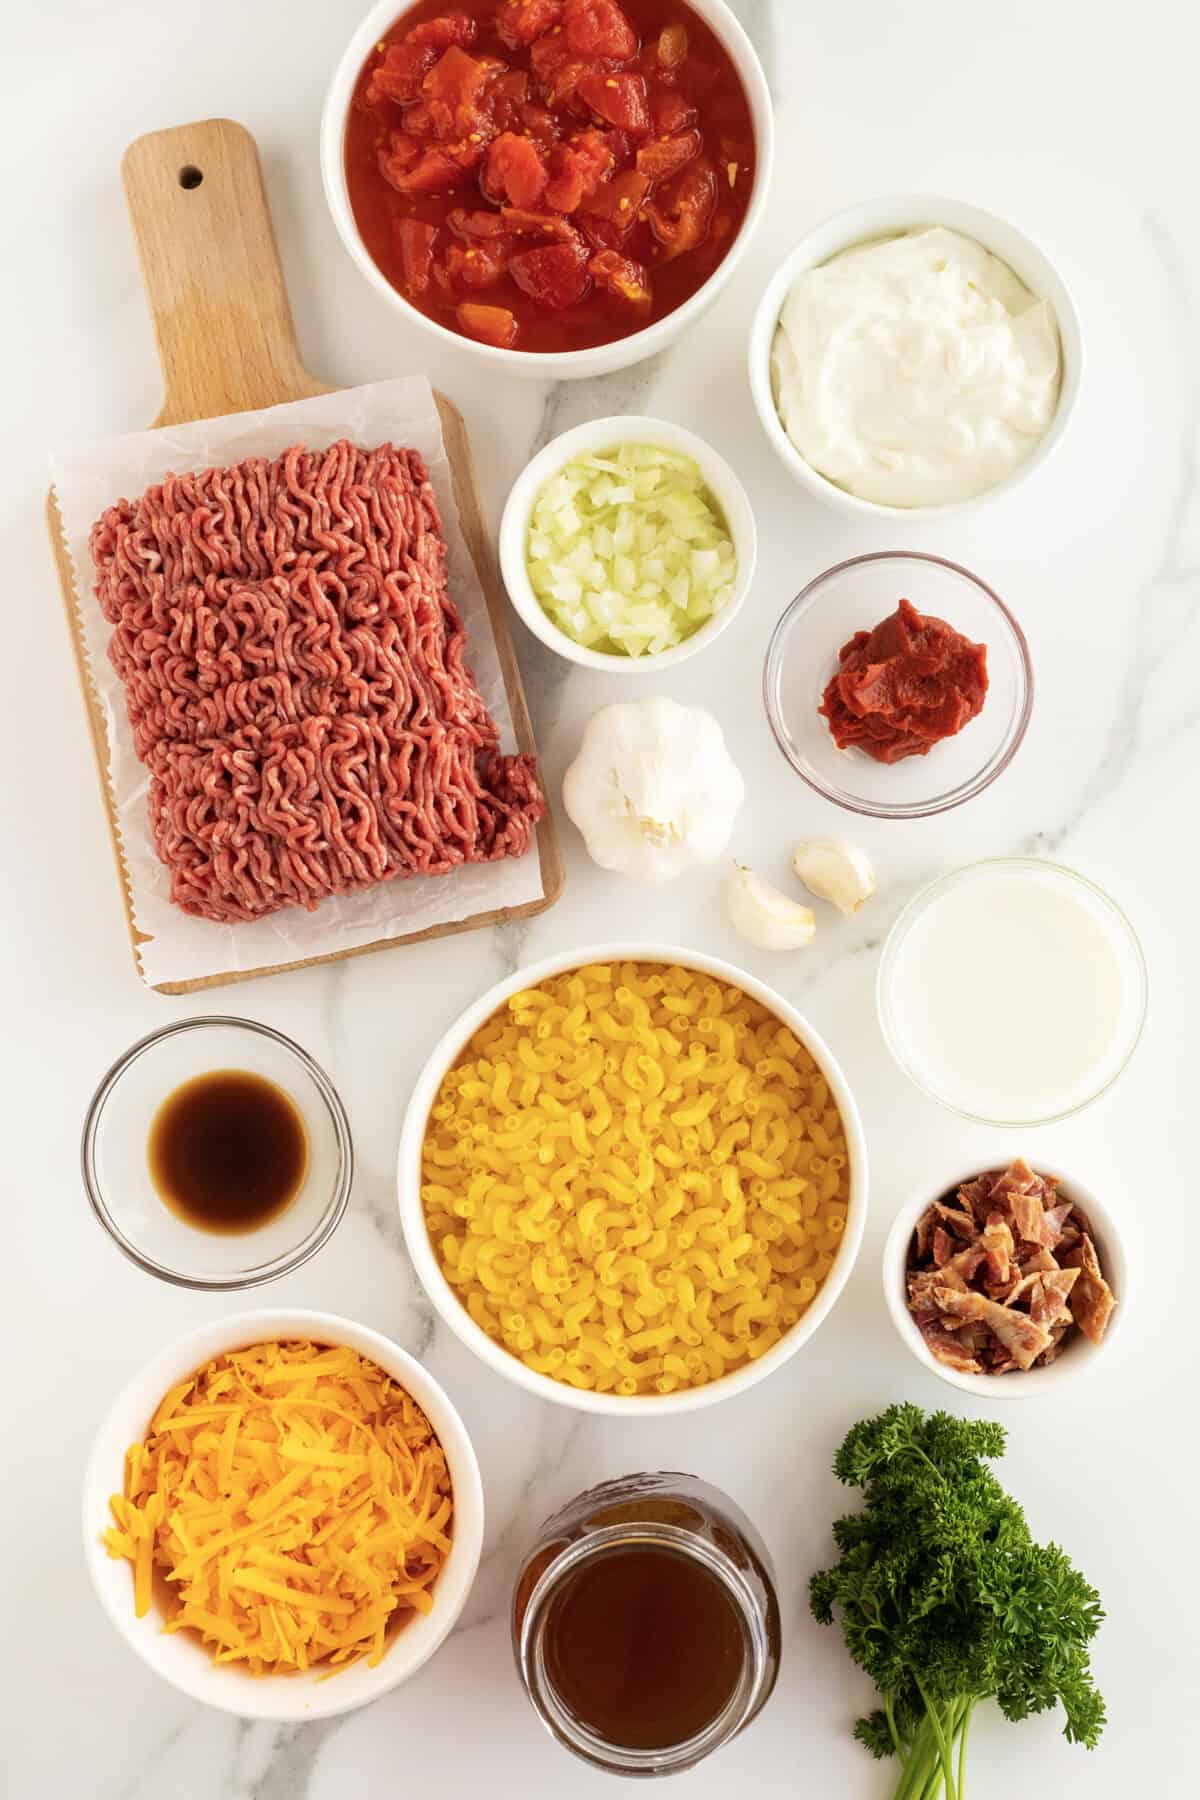 cheeseburger casserole ingredients in small white and clear bowls